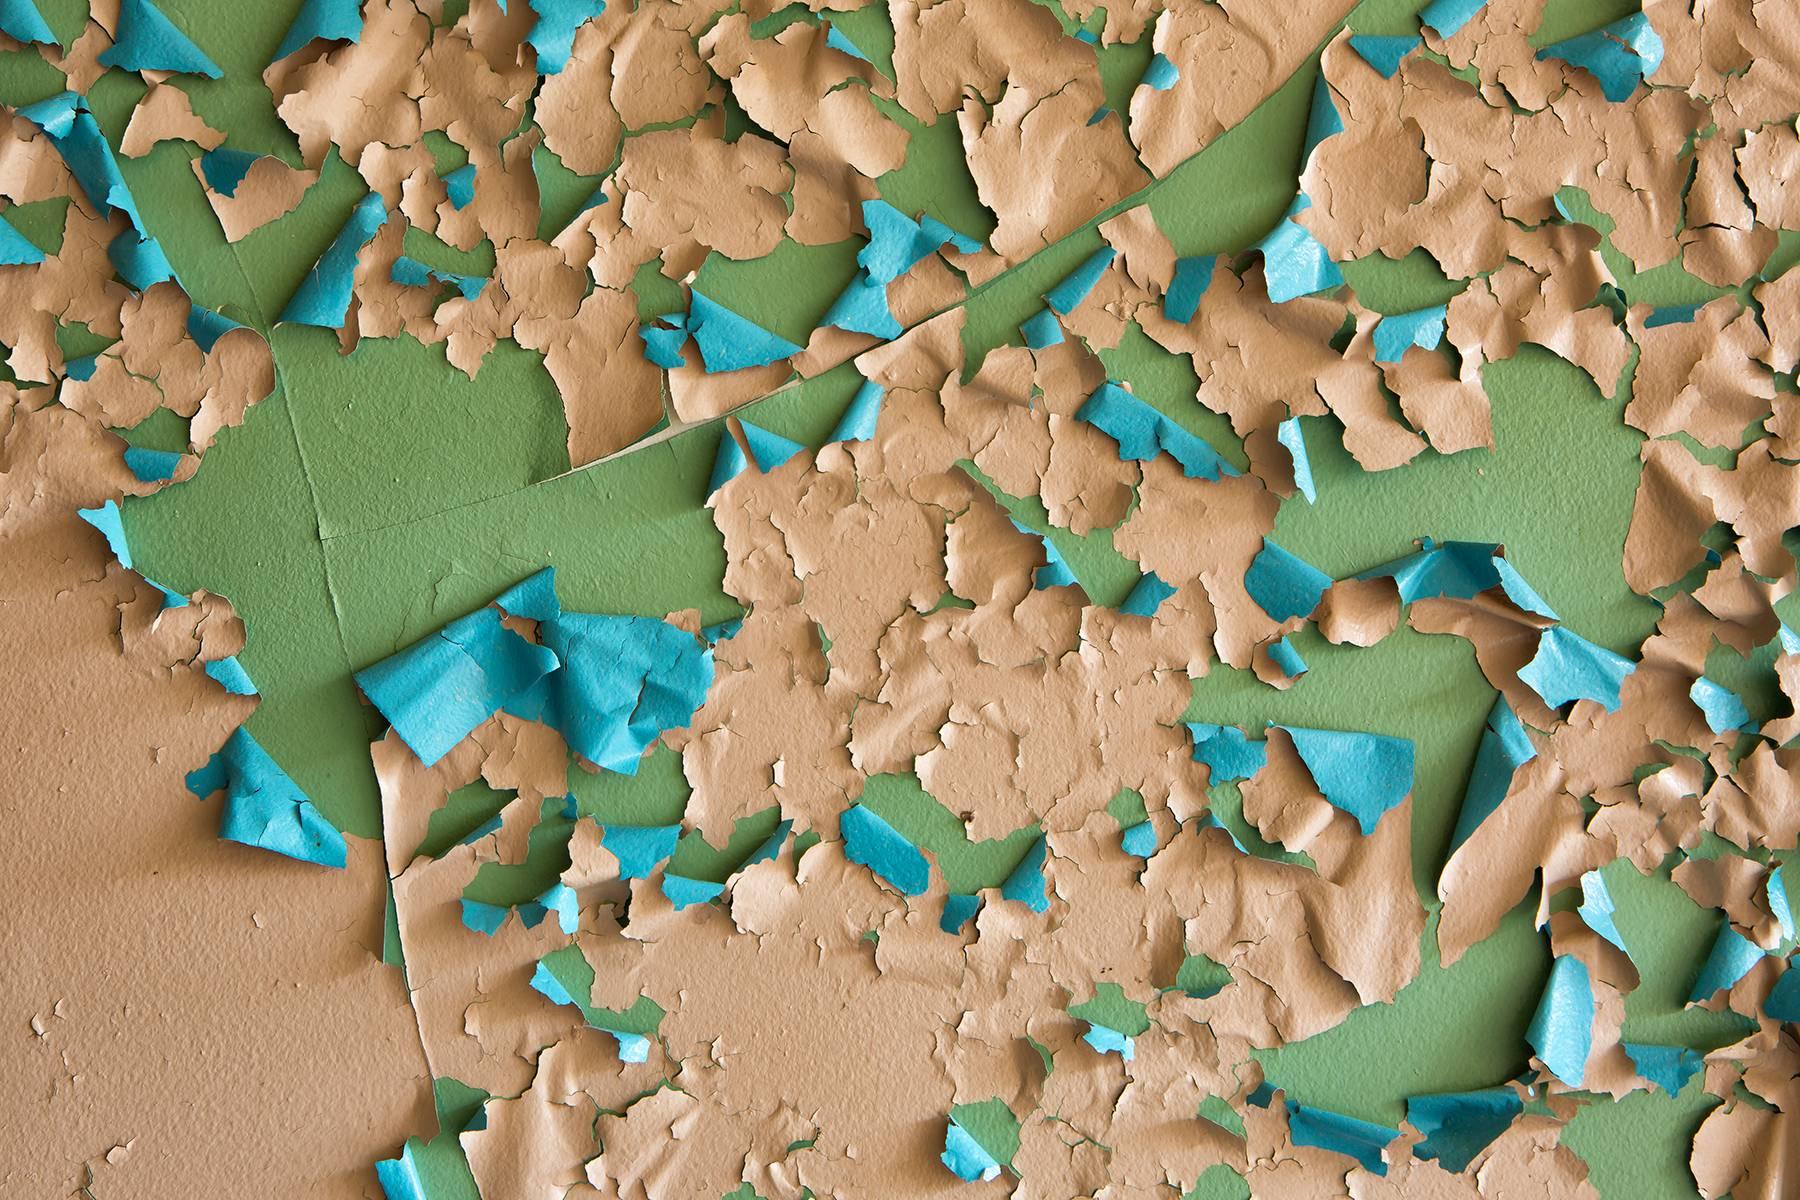 "Crumbling", abstract, peeling paint, green, blue, peach, color photograph - Photograph by Rebecca Skinner